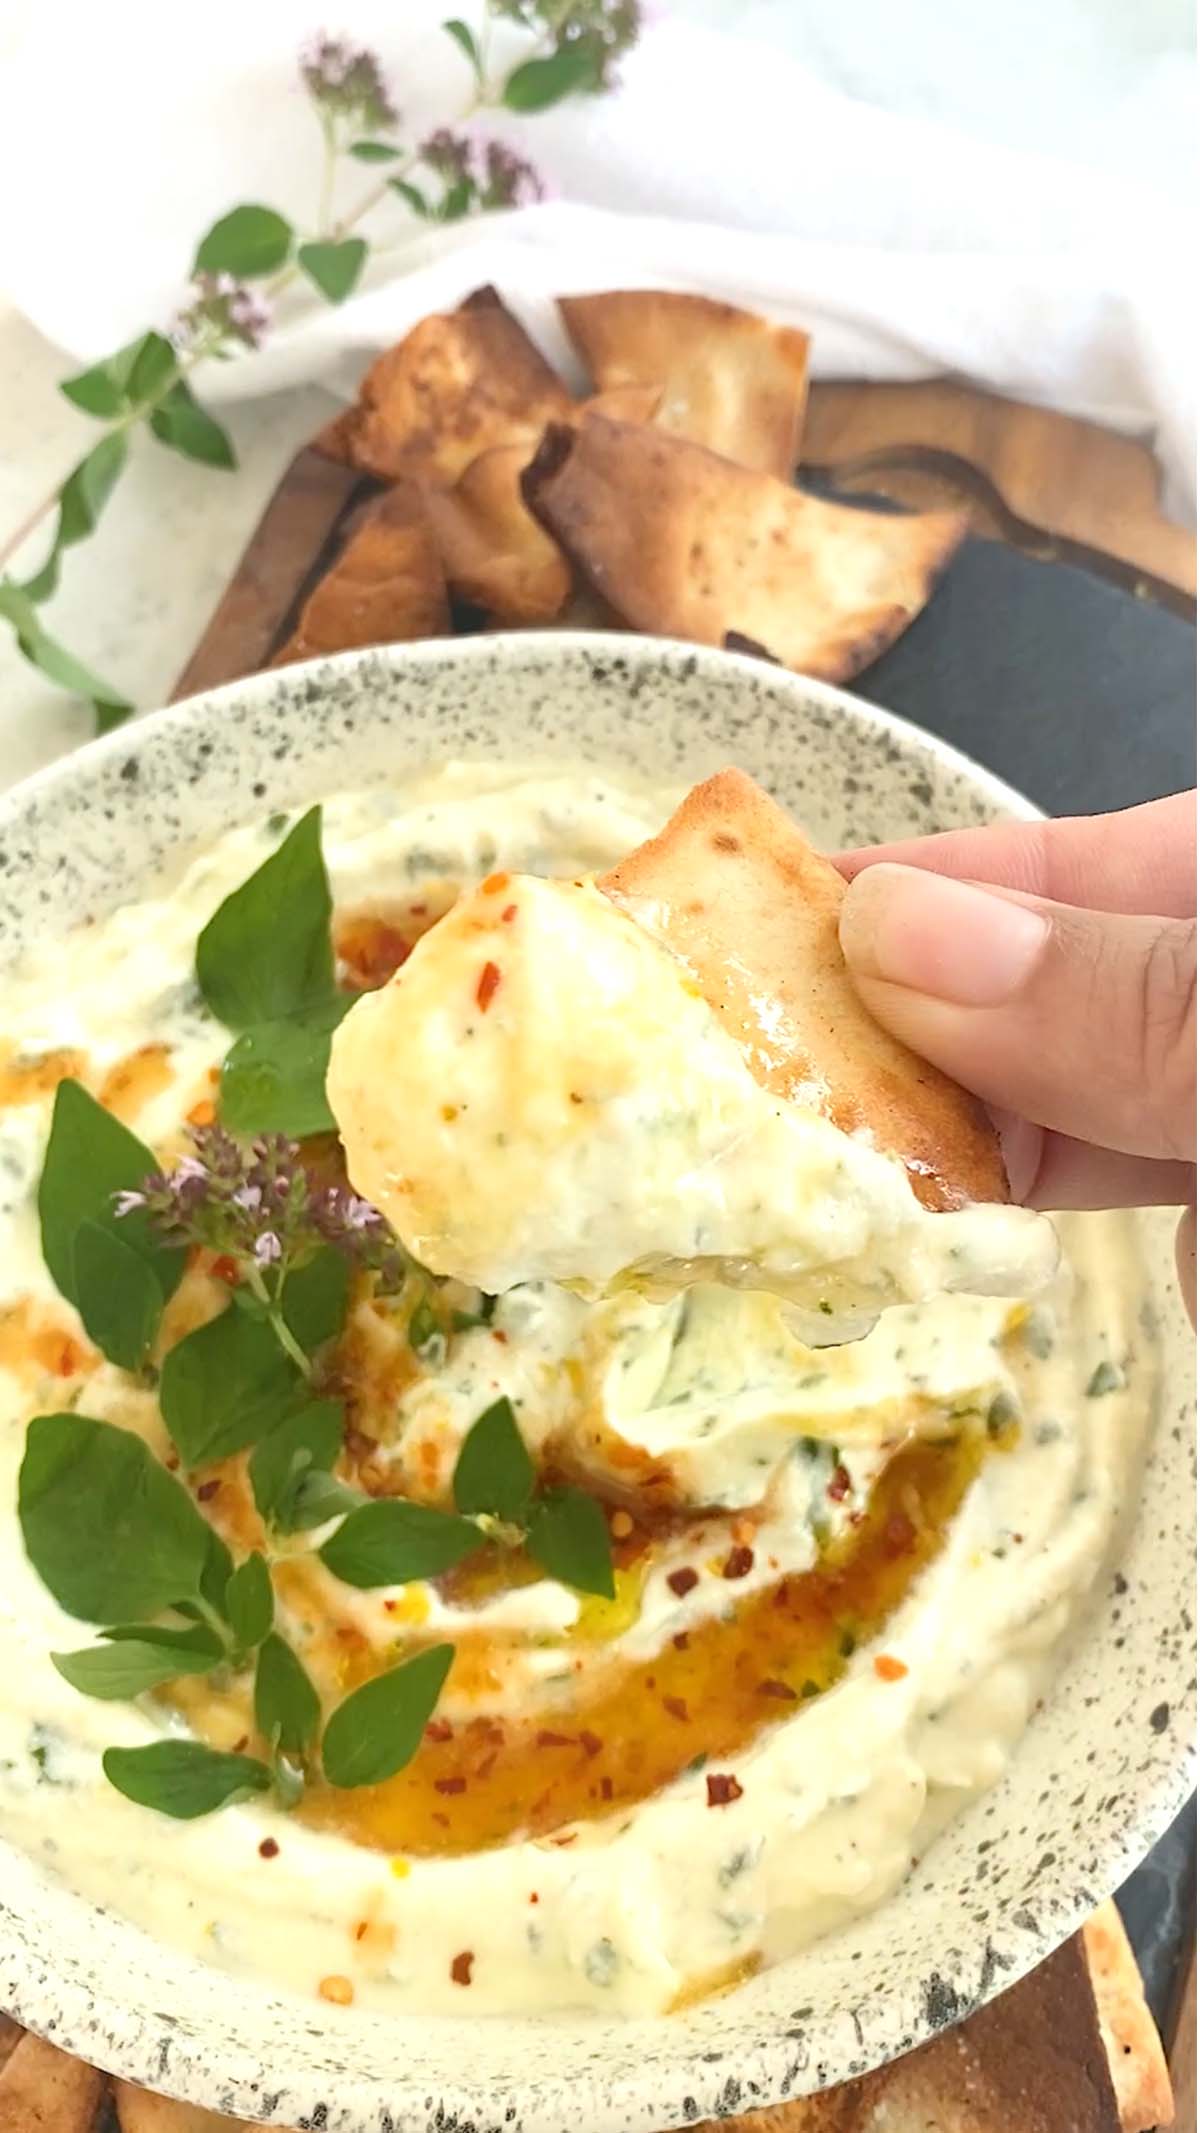 Dipping a pita chip in whipped ricotta.